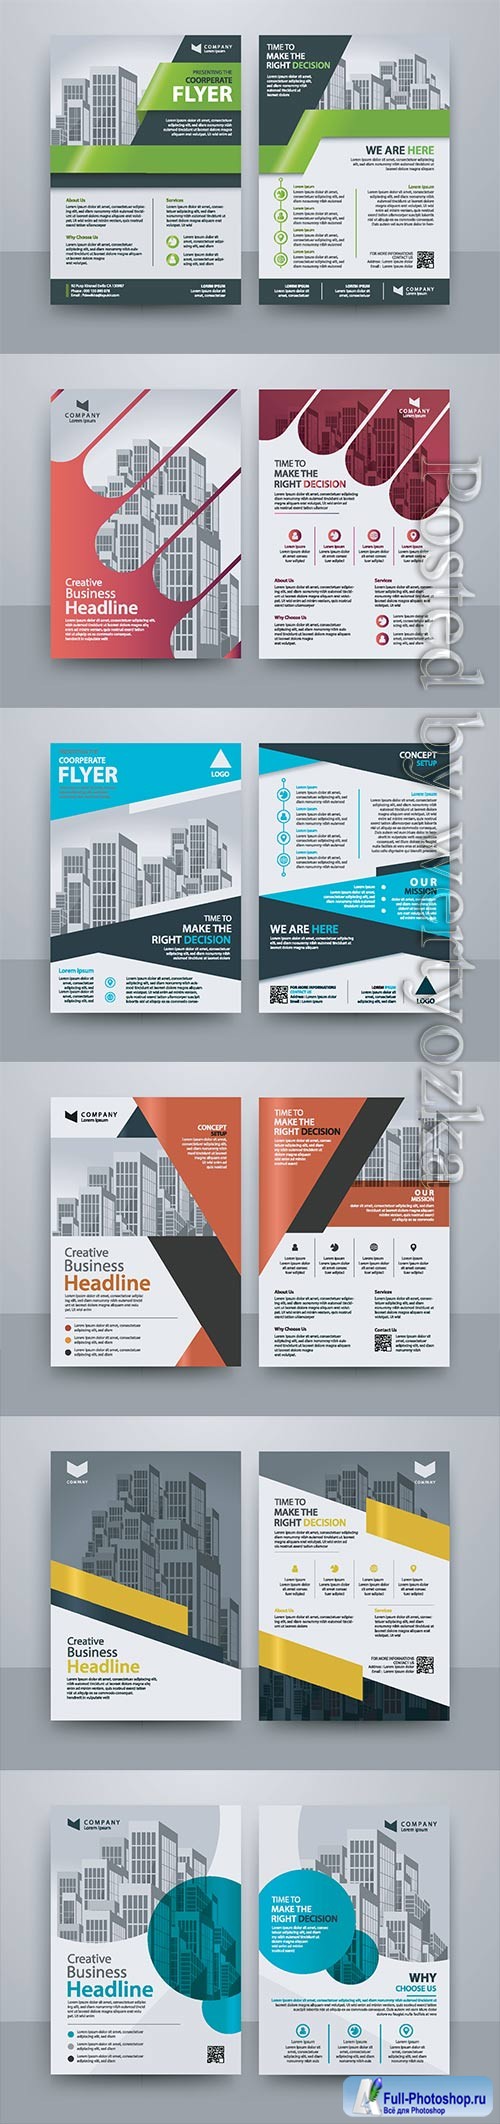 Business vector template for brochure, annual report, magazine # 20